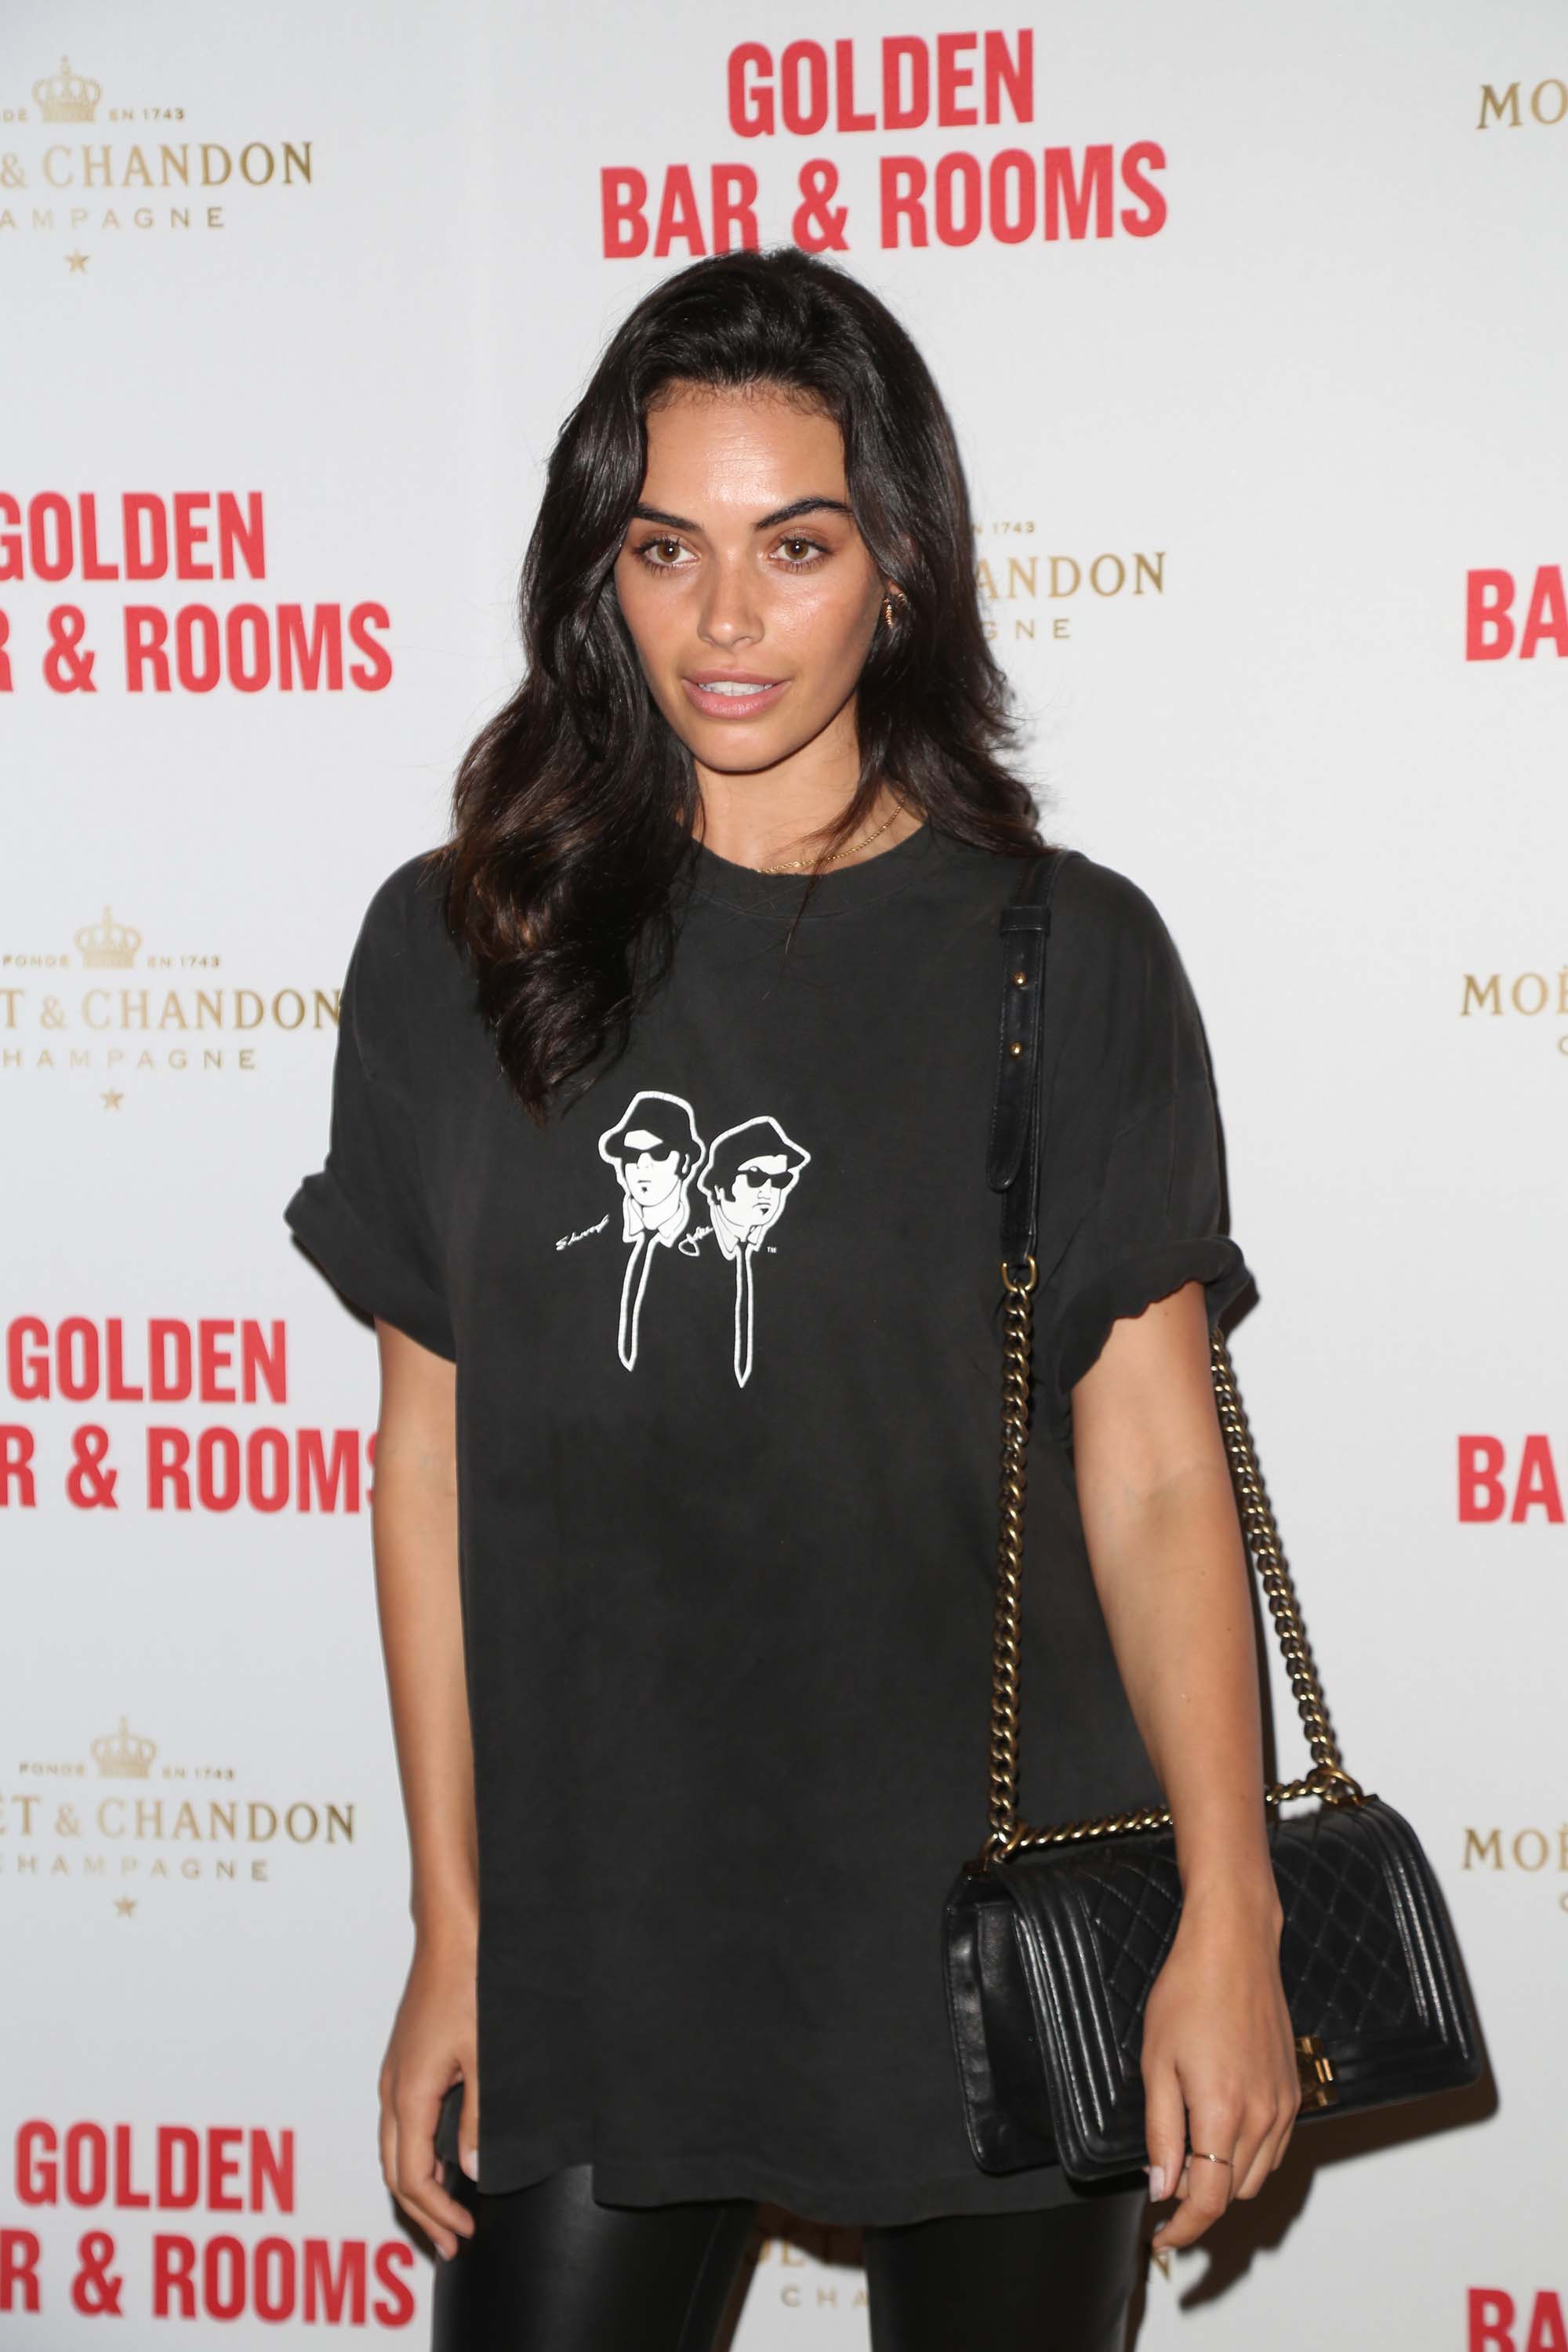 Monika Clarke attends Double Bay institution launching The Golden Bar & Rooms